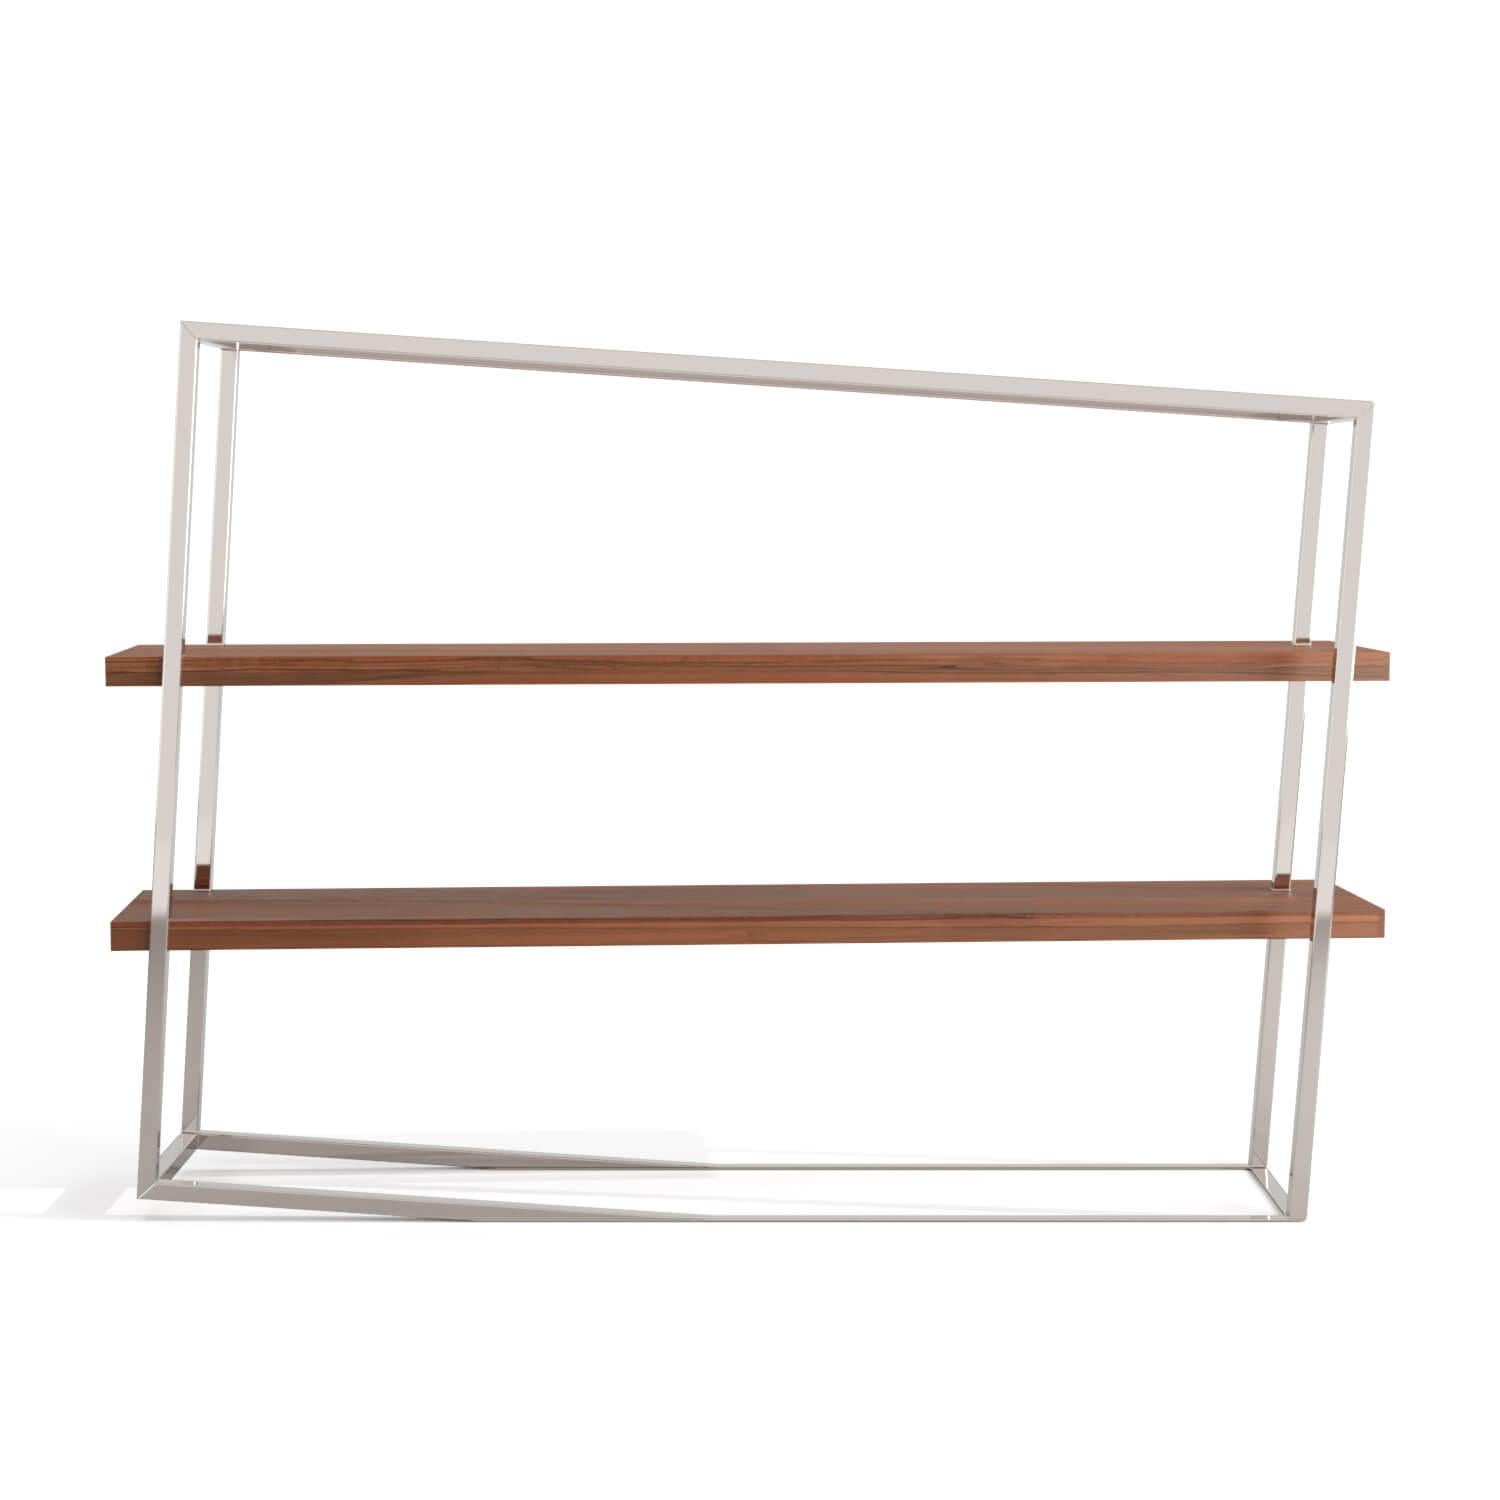 Contemporary Modern Accent Bookcase with Shelves in White Lacquer and Brushed Stainless Steel For Sale